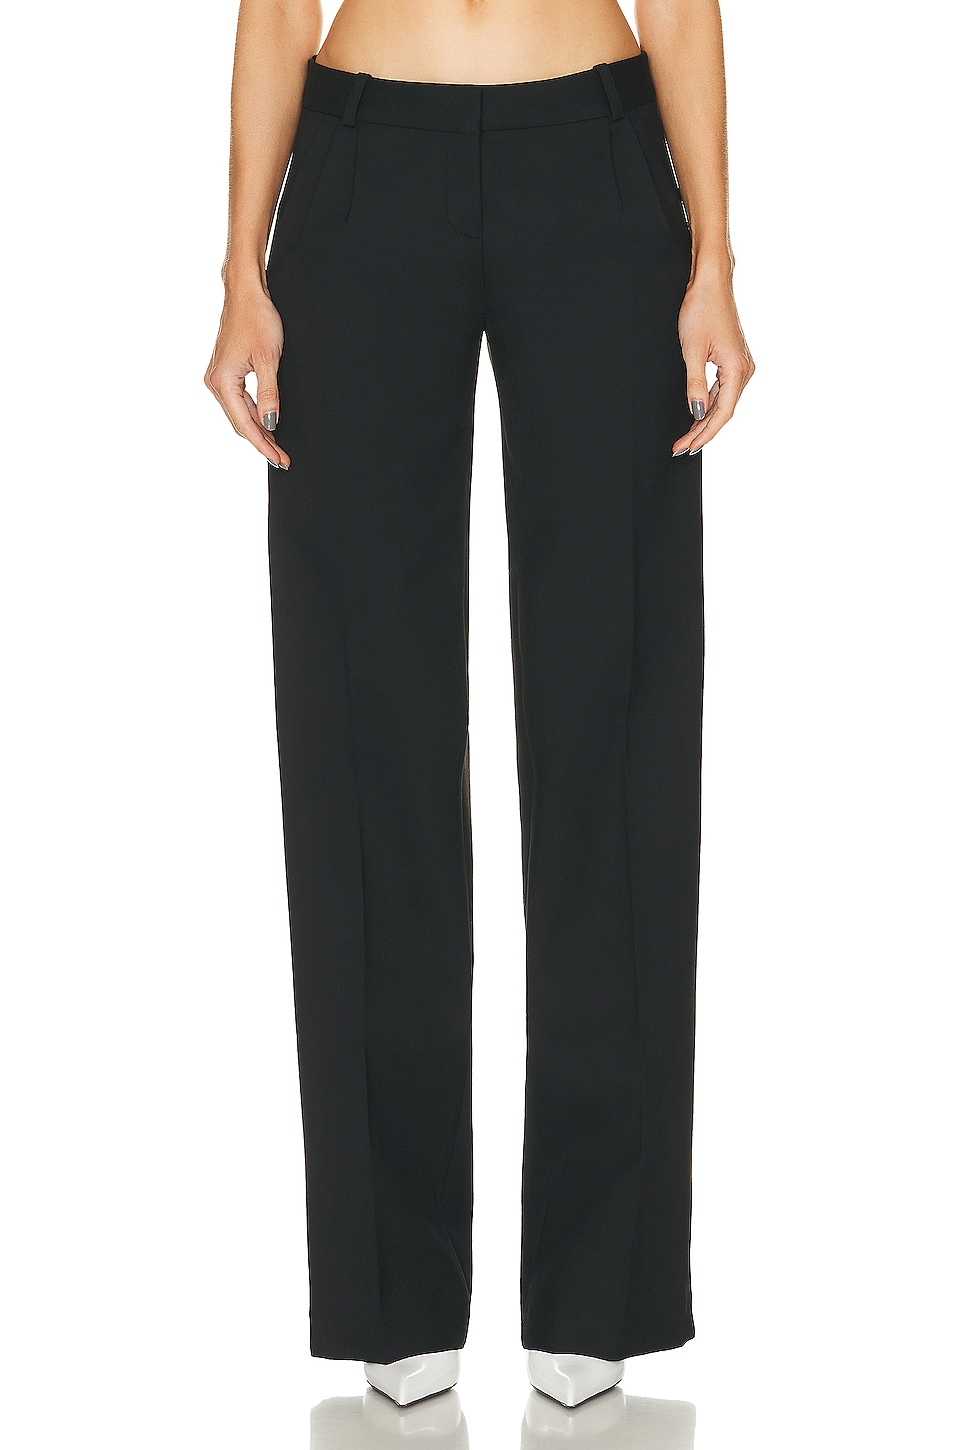 Image 1 of Coperni Low Rise Loose Tailored Trousers in Black